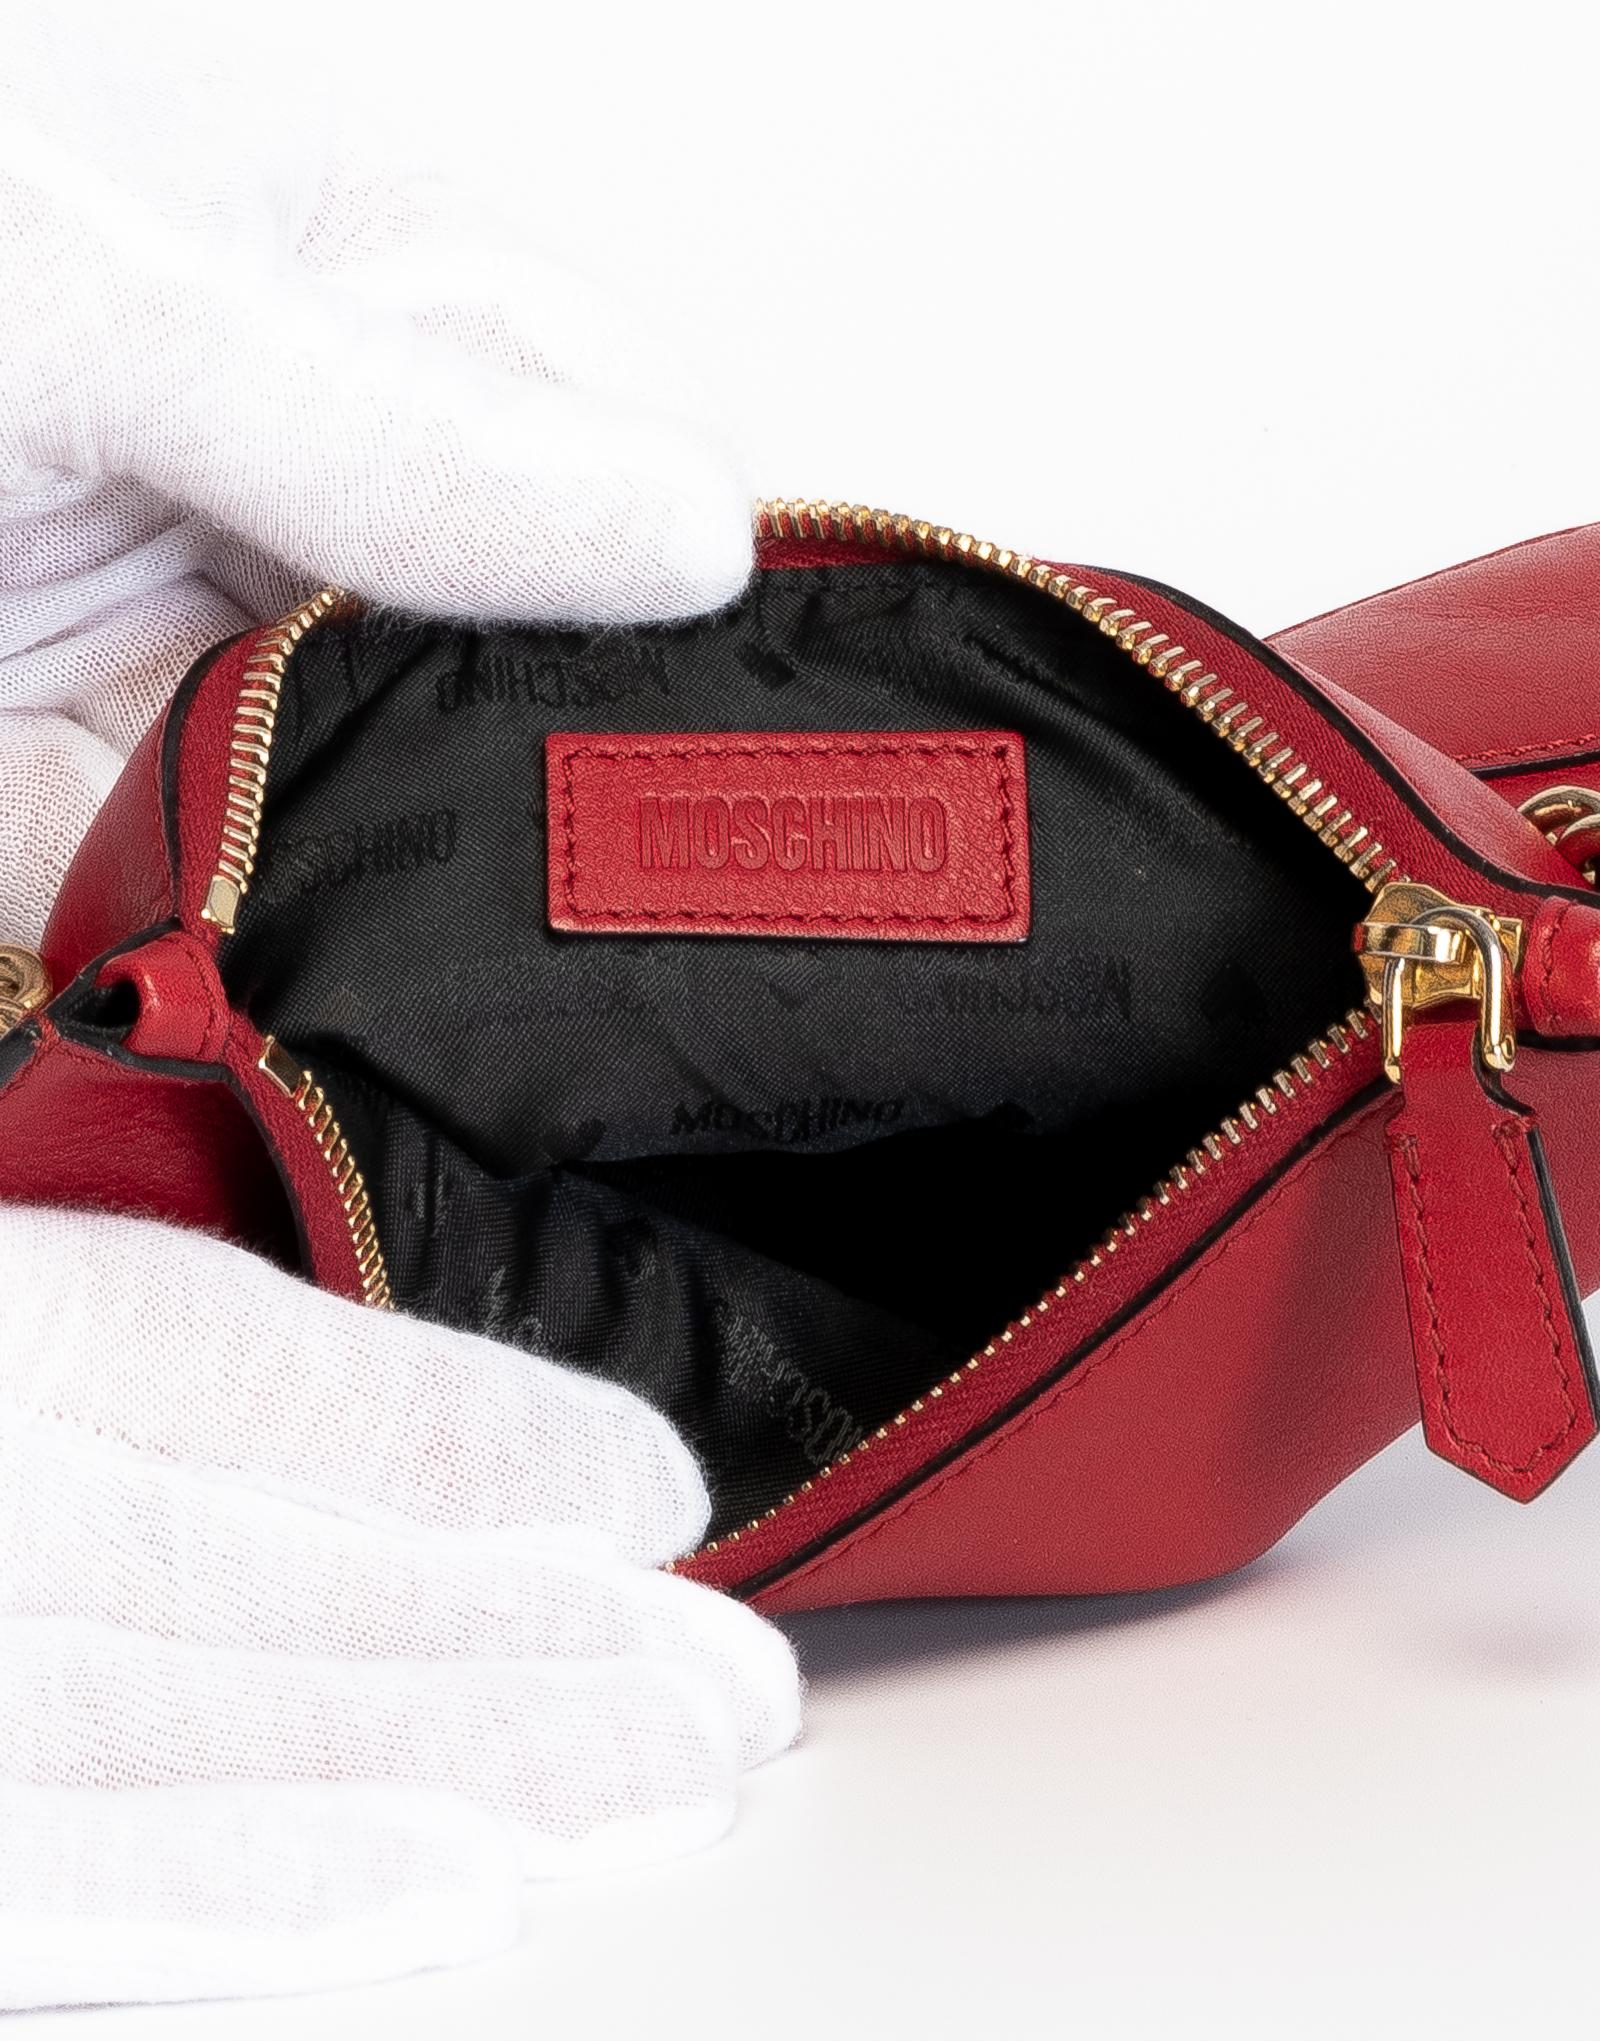 Moschino 30th Anniversary Red Leather Clutch In New Condition For Sale In Montreal, Quebec